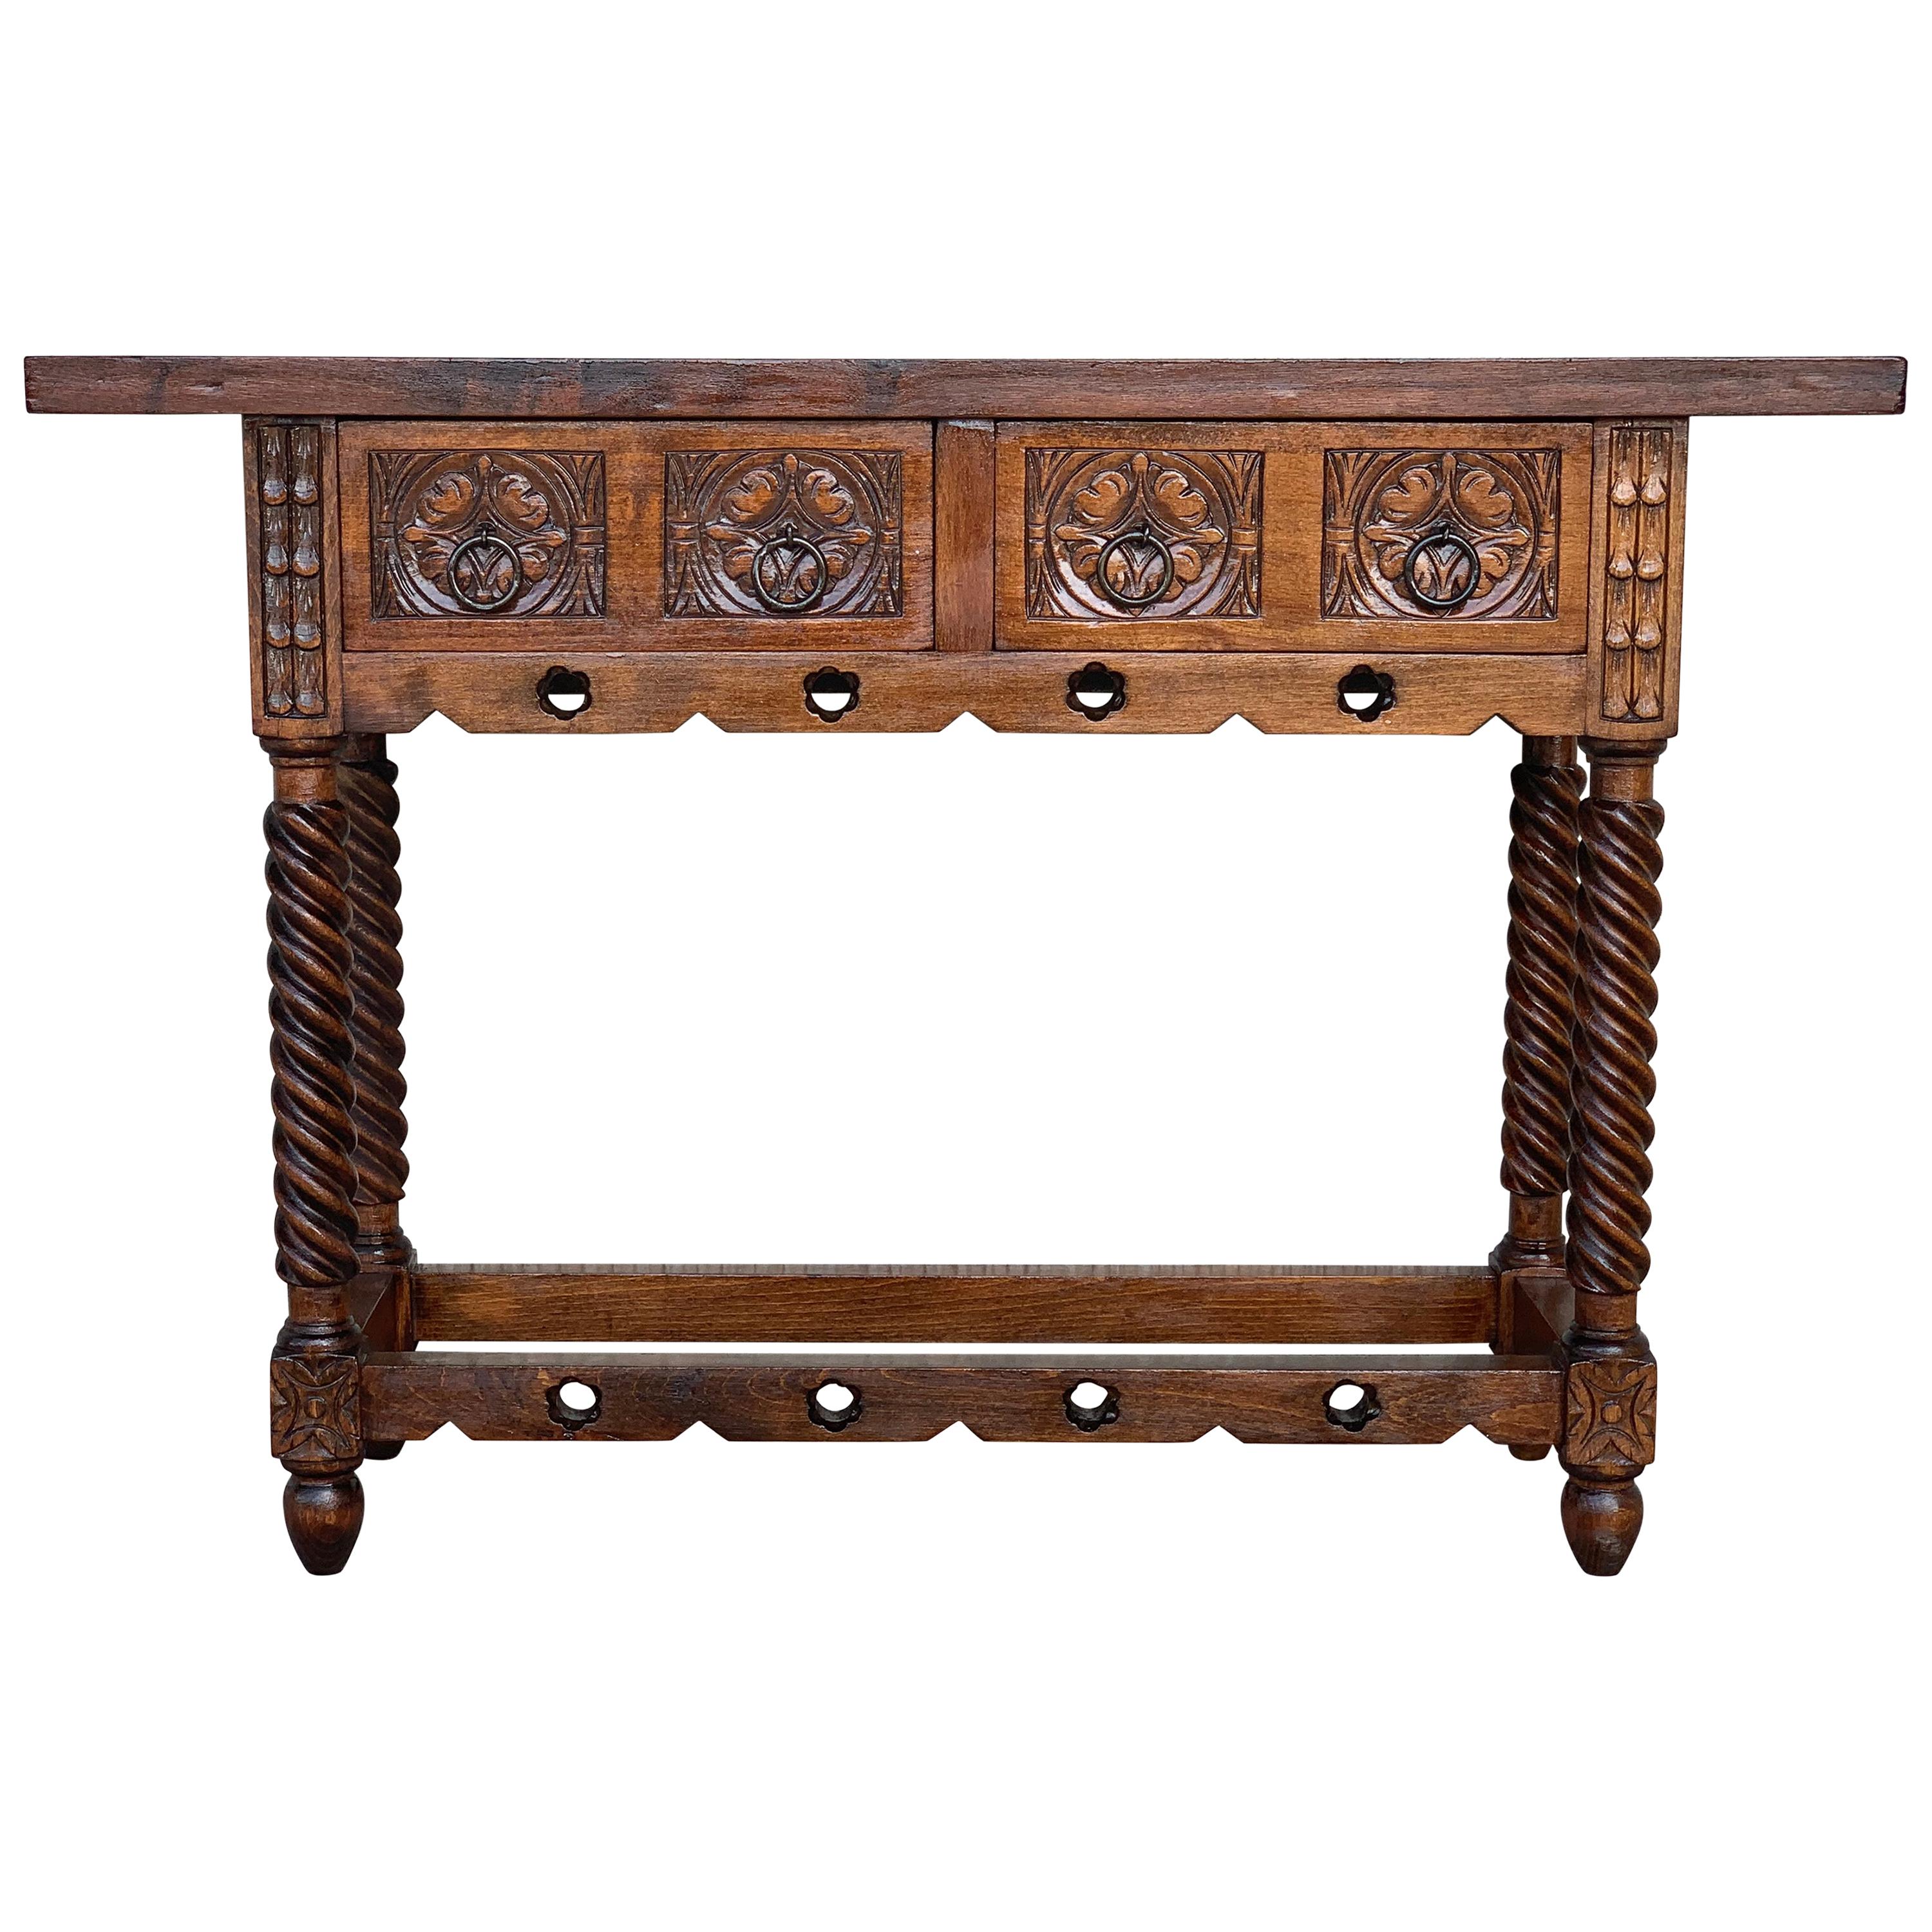 18th Carved Two-Drawer Baroque Spanish Walnut Console Table with Iron Hardware